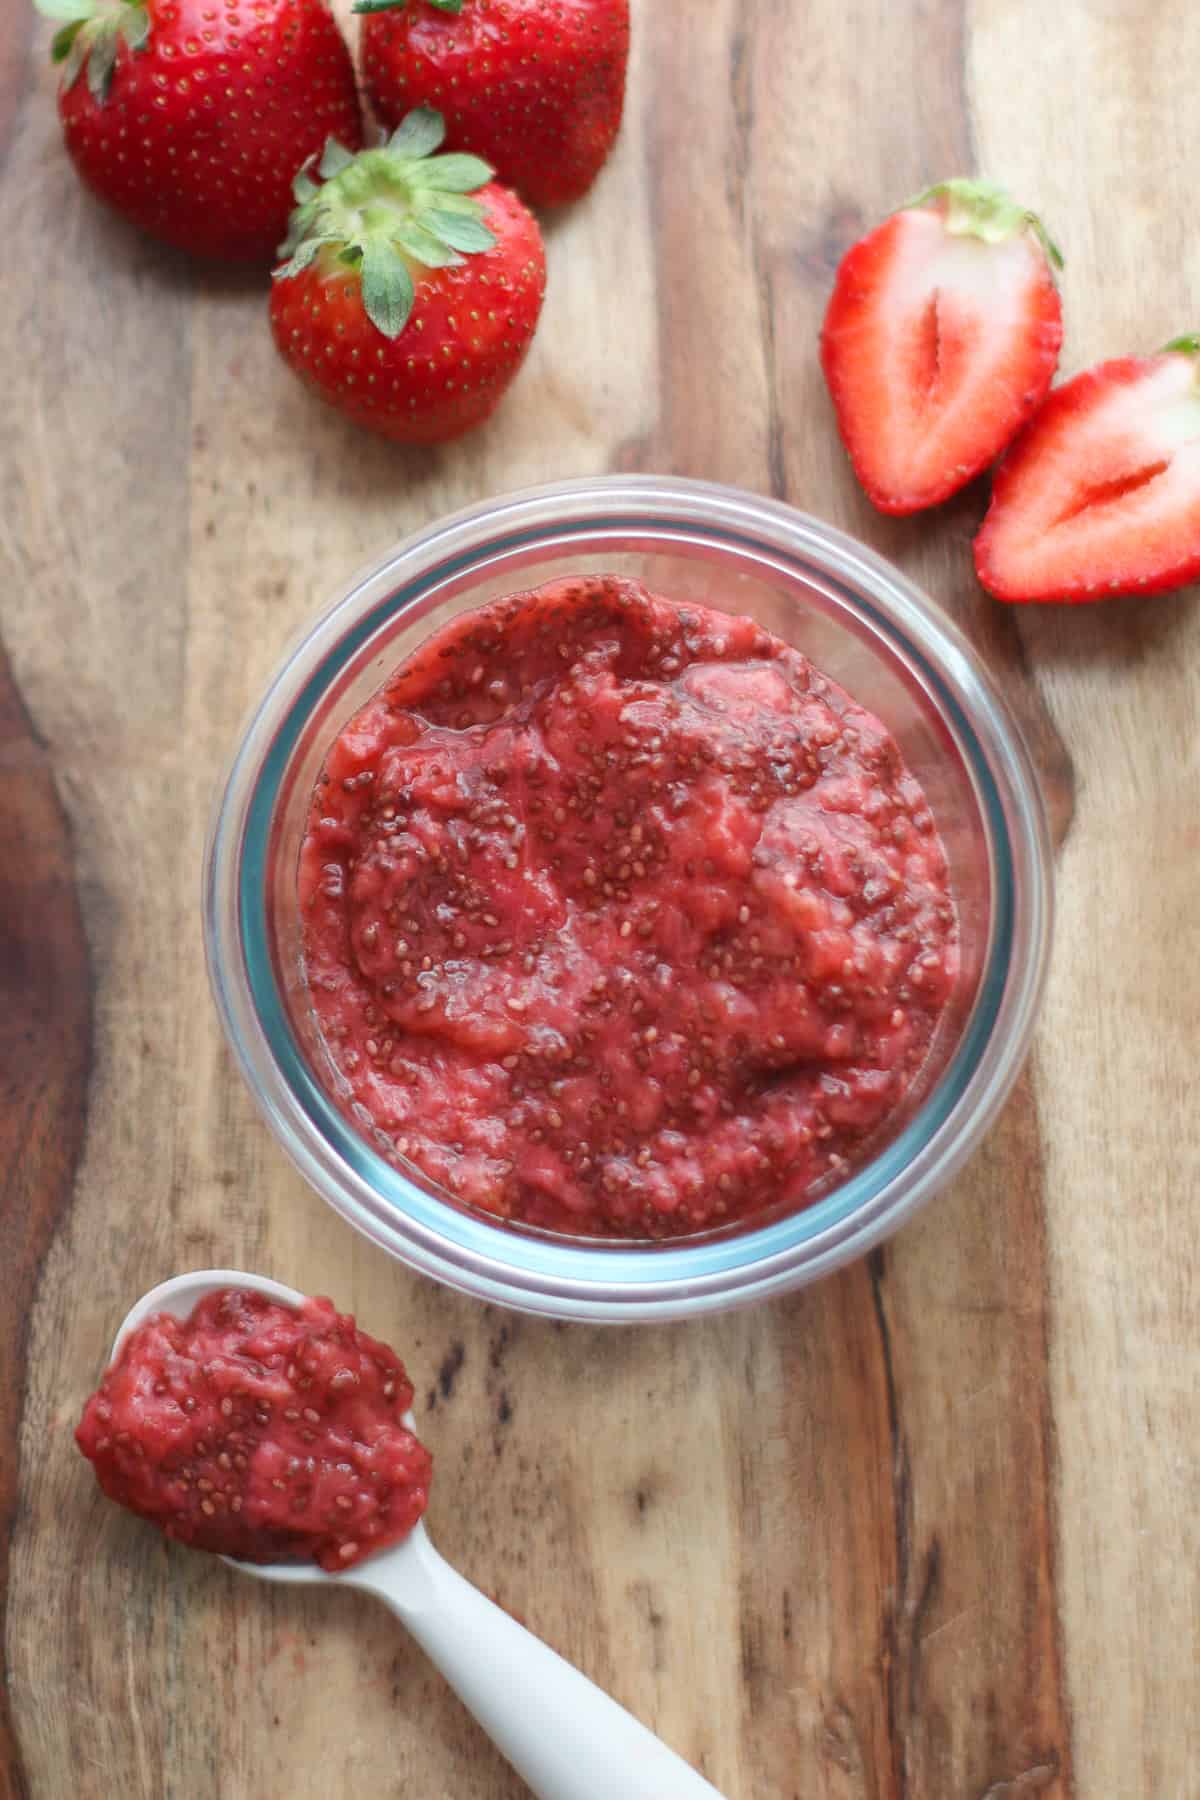 Jam stored in a glass container with fresh strawberries in the background.